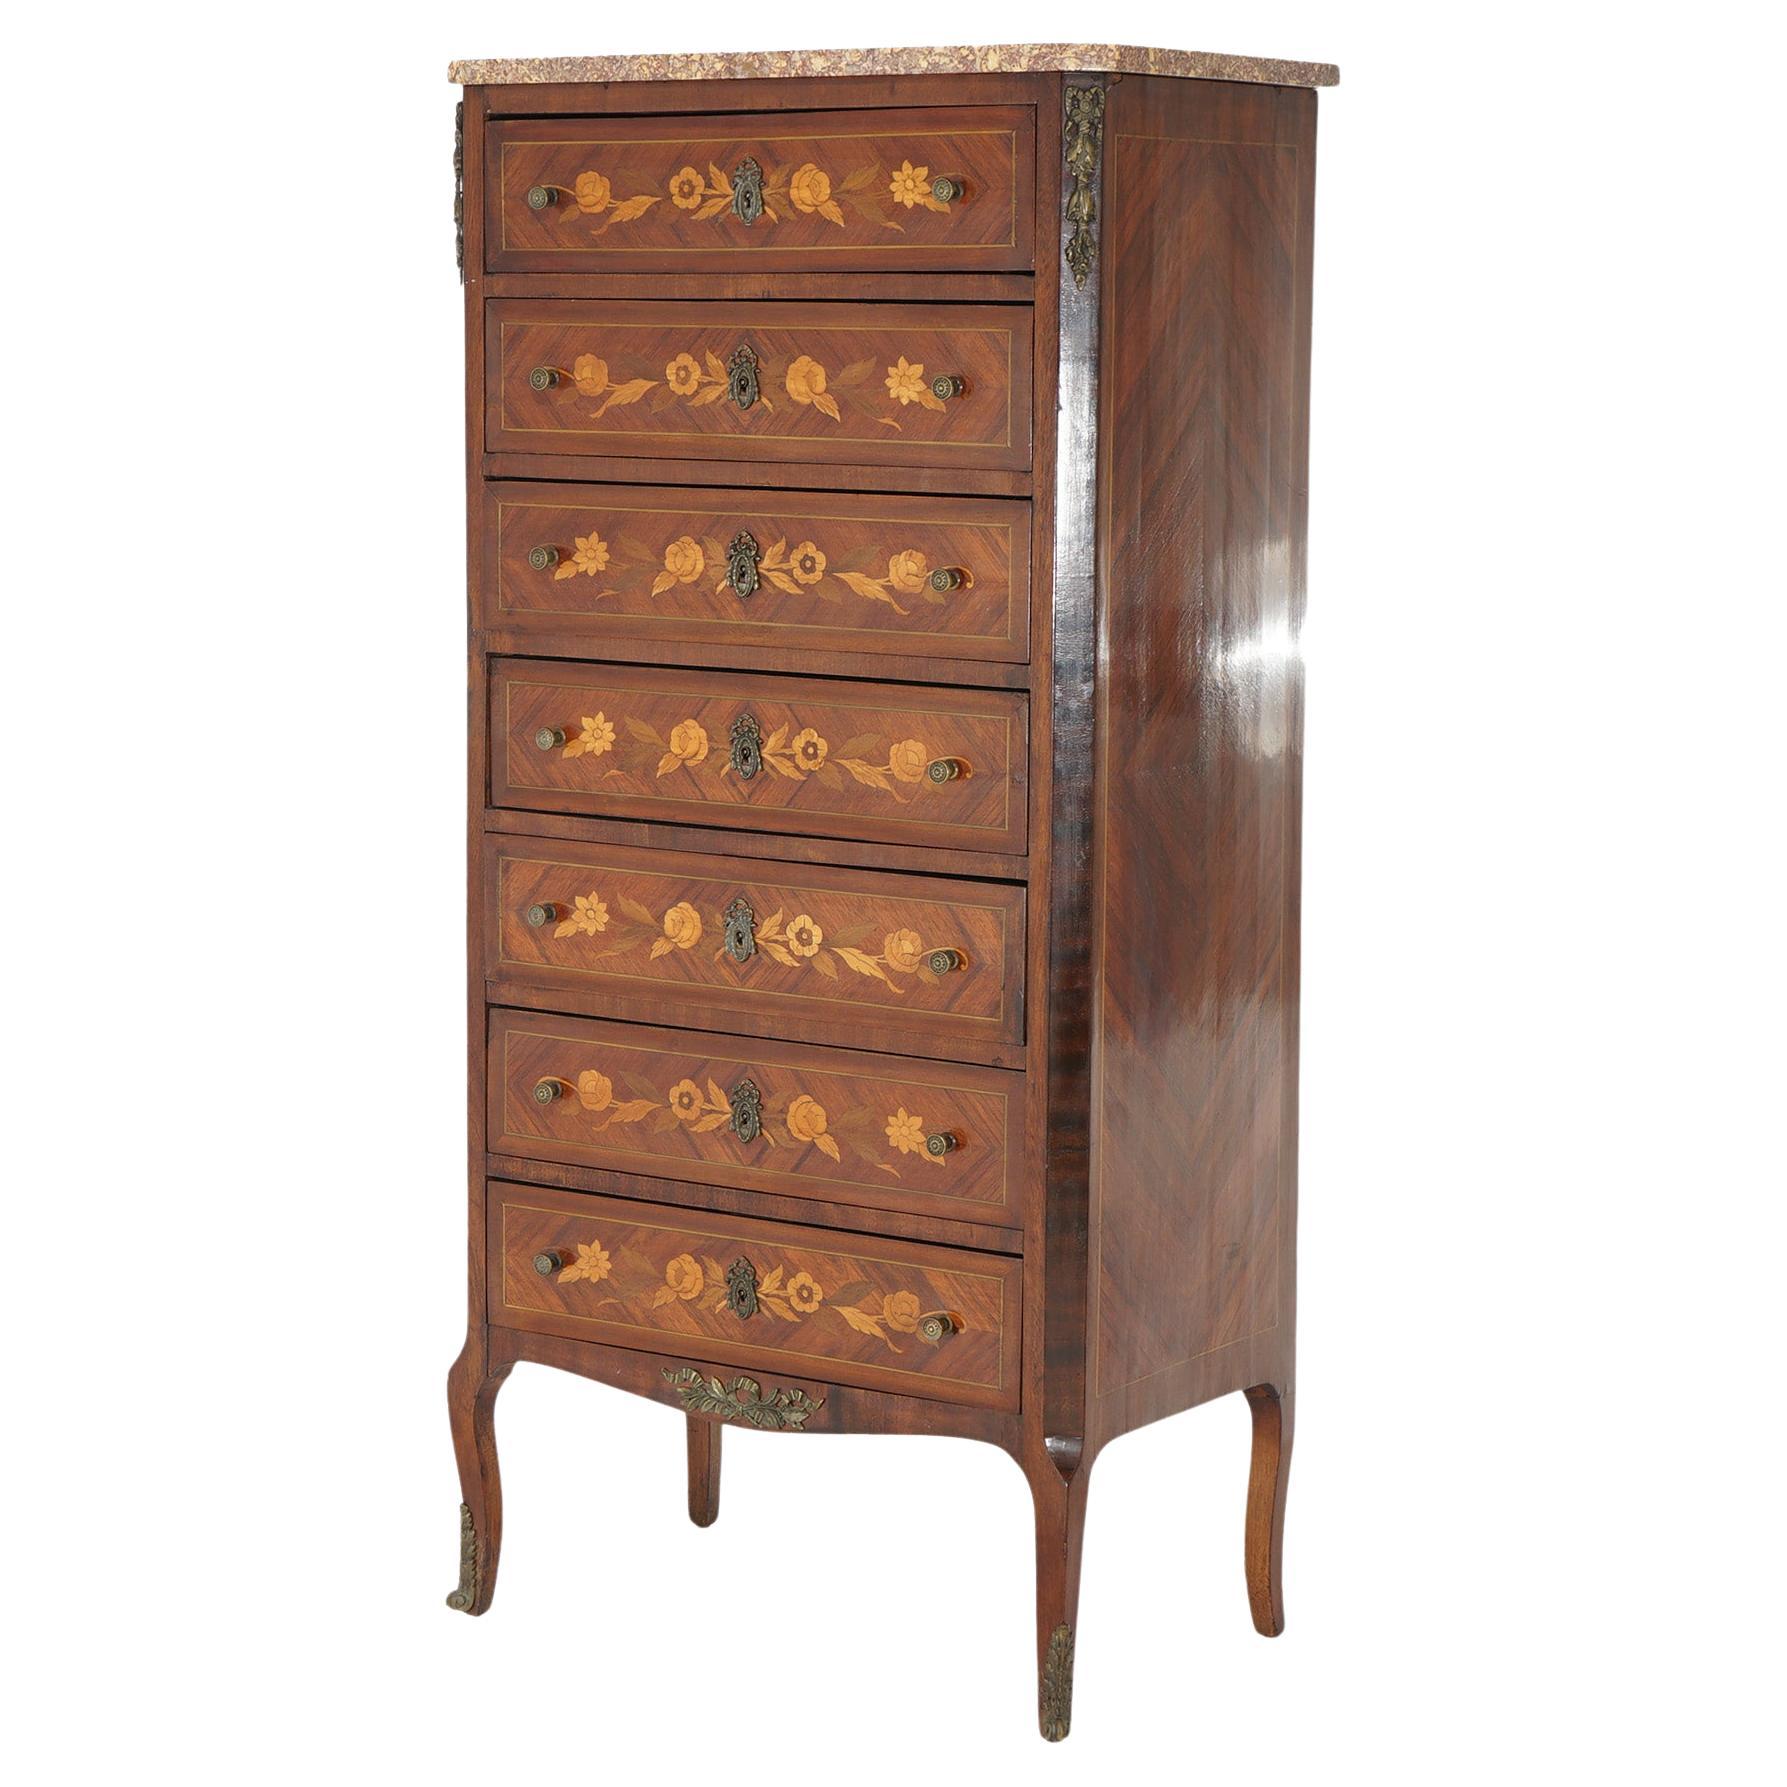 Antique French Kingwood, Satinwood, Marble & Ormolu Lingerie Chest 19thC For Sale